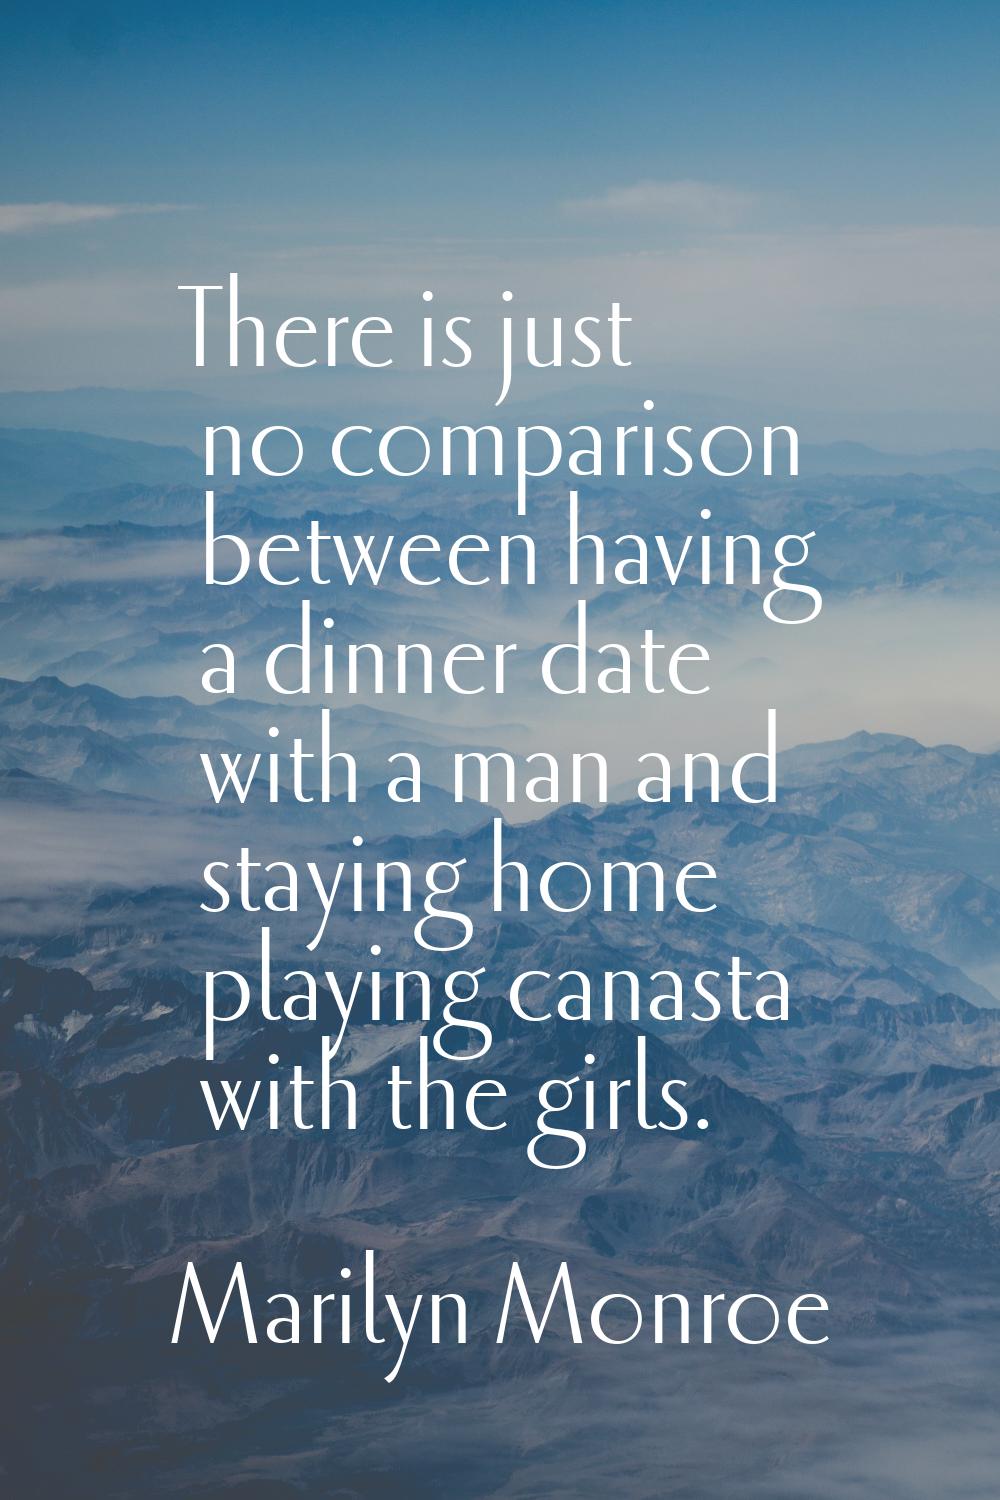 There is just no comparison between having a dinner date with a man and staying home playing canast